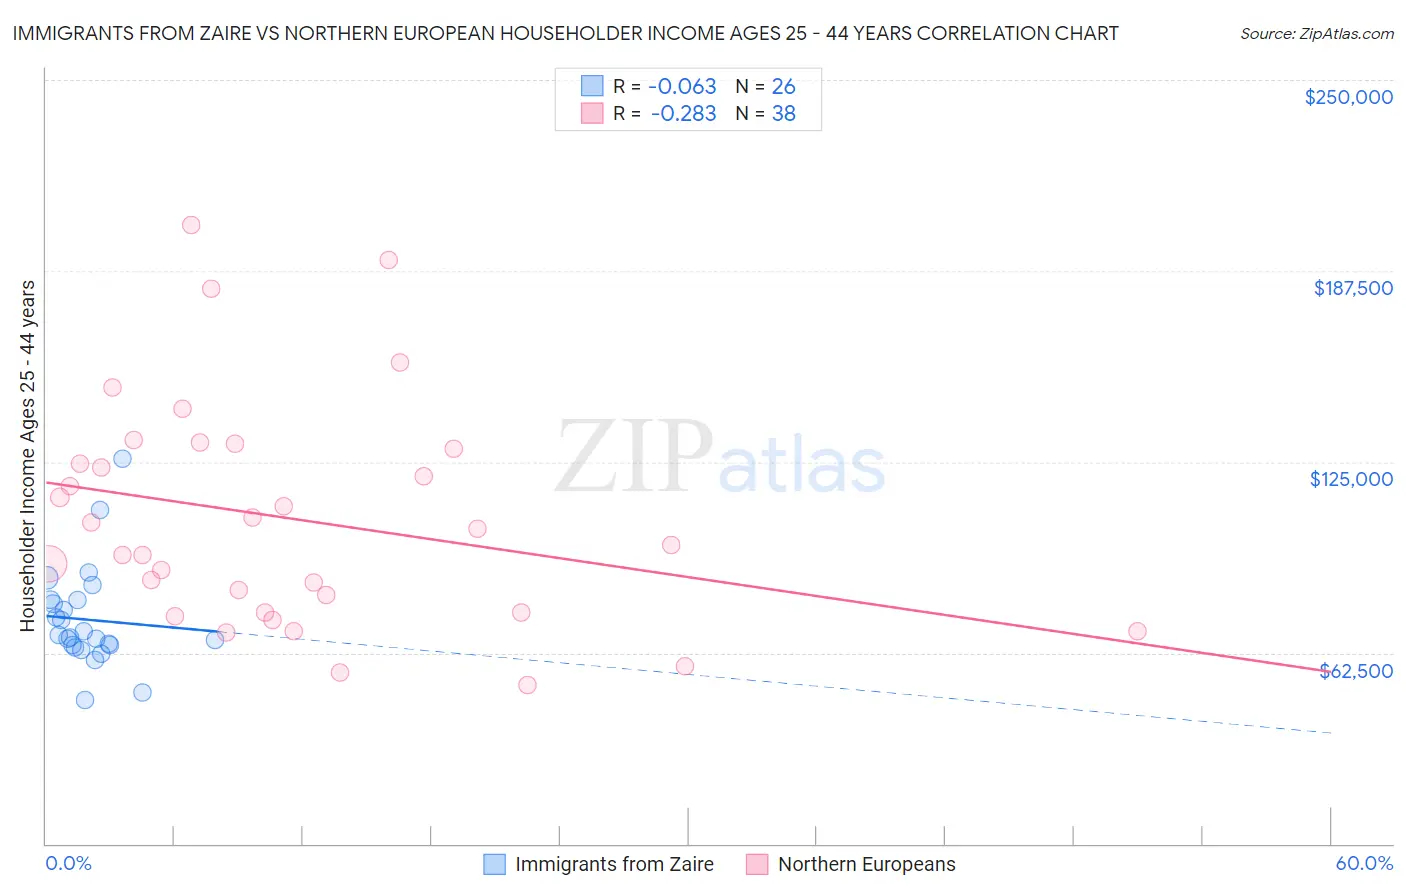 Immigrants from Zaire vs Northern European Householder Income Ages 25 - 44 years